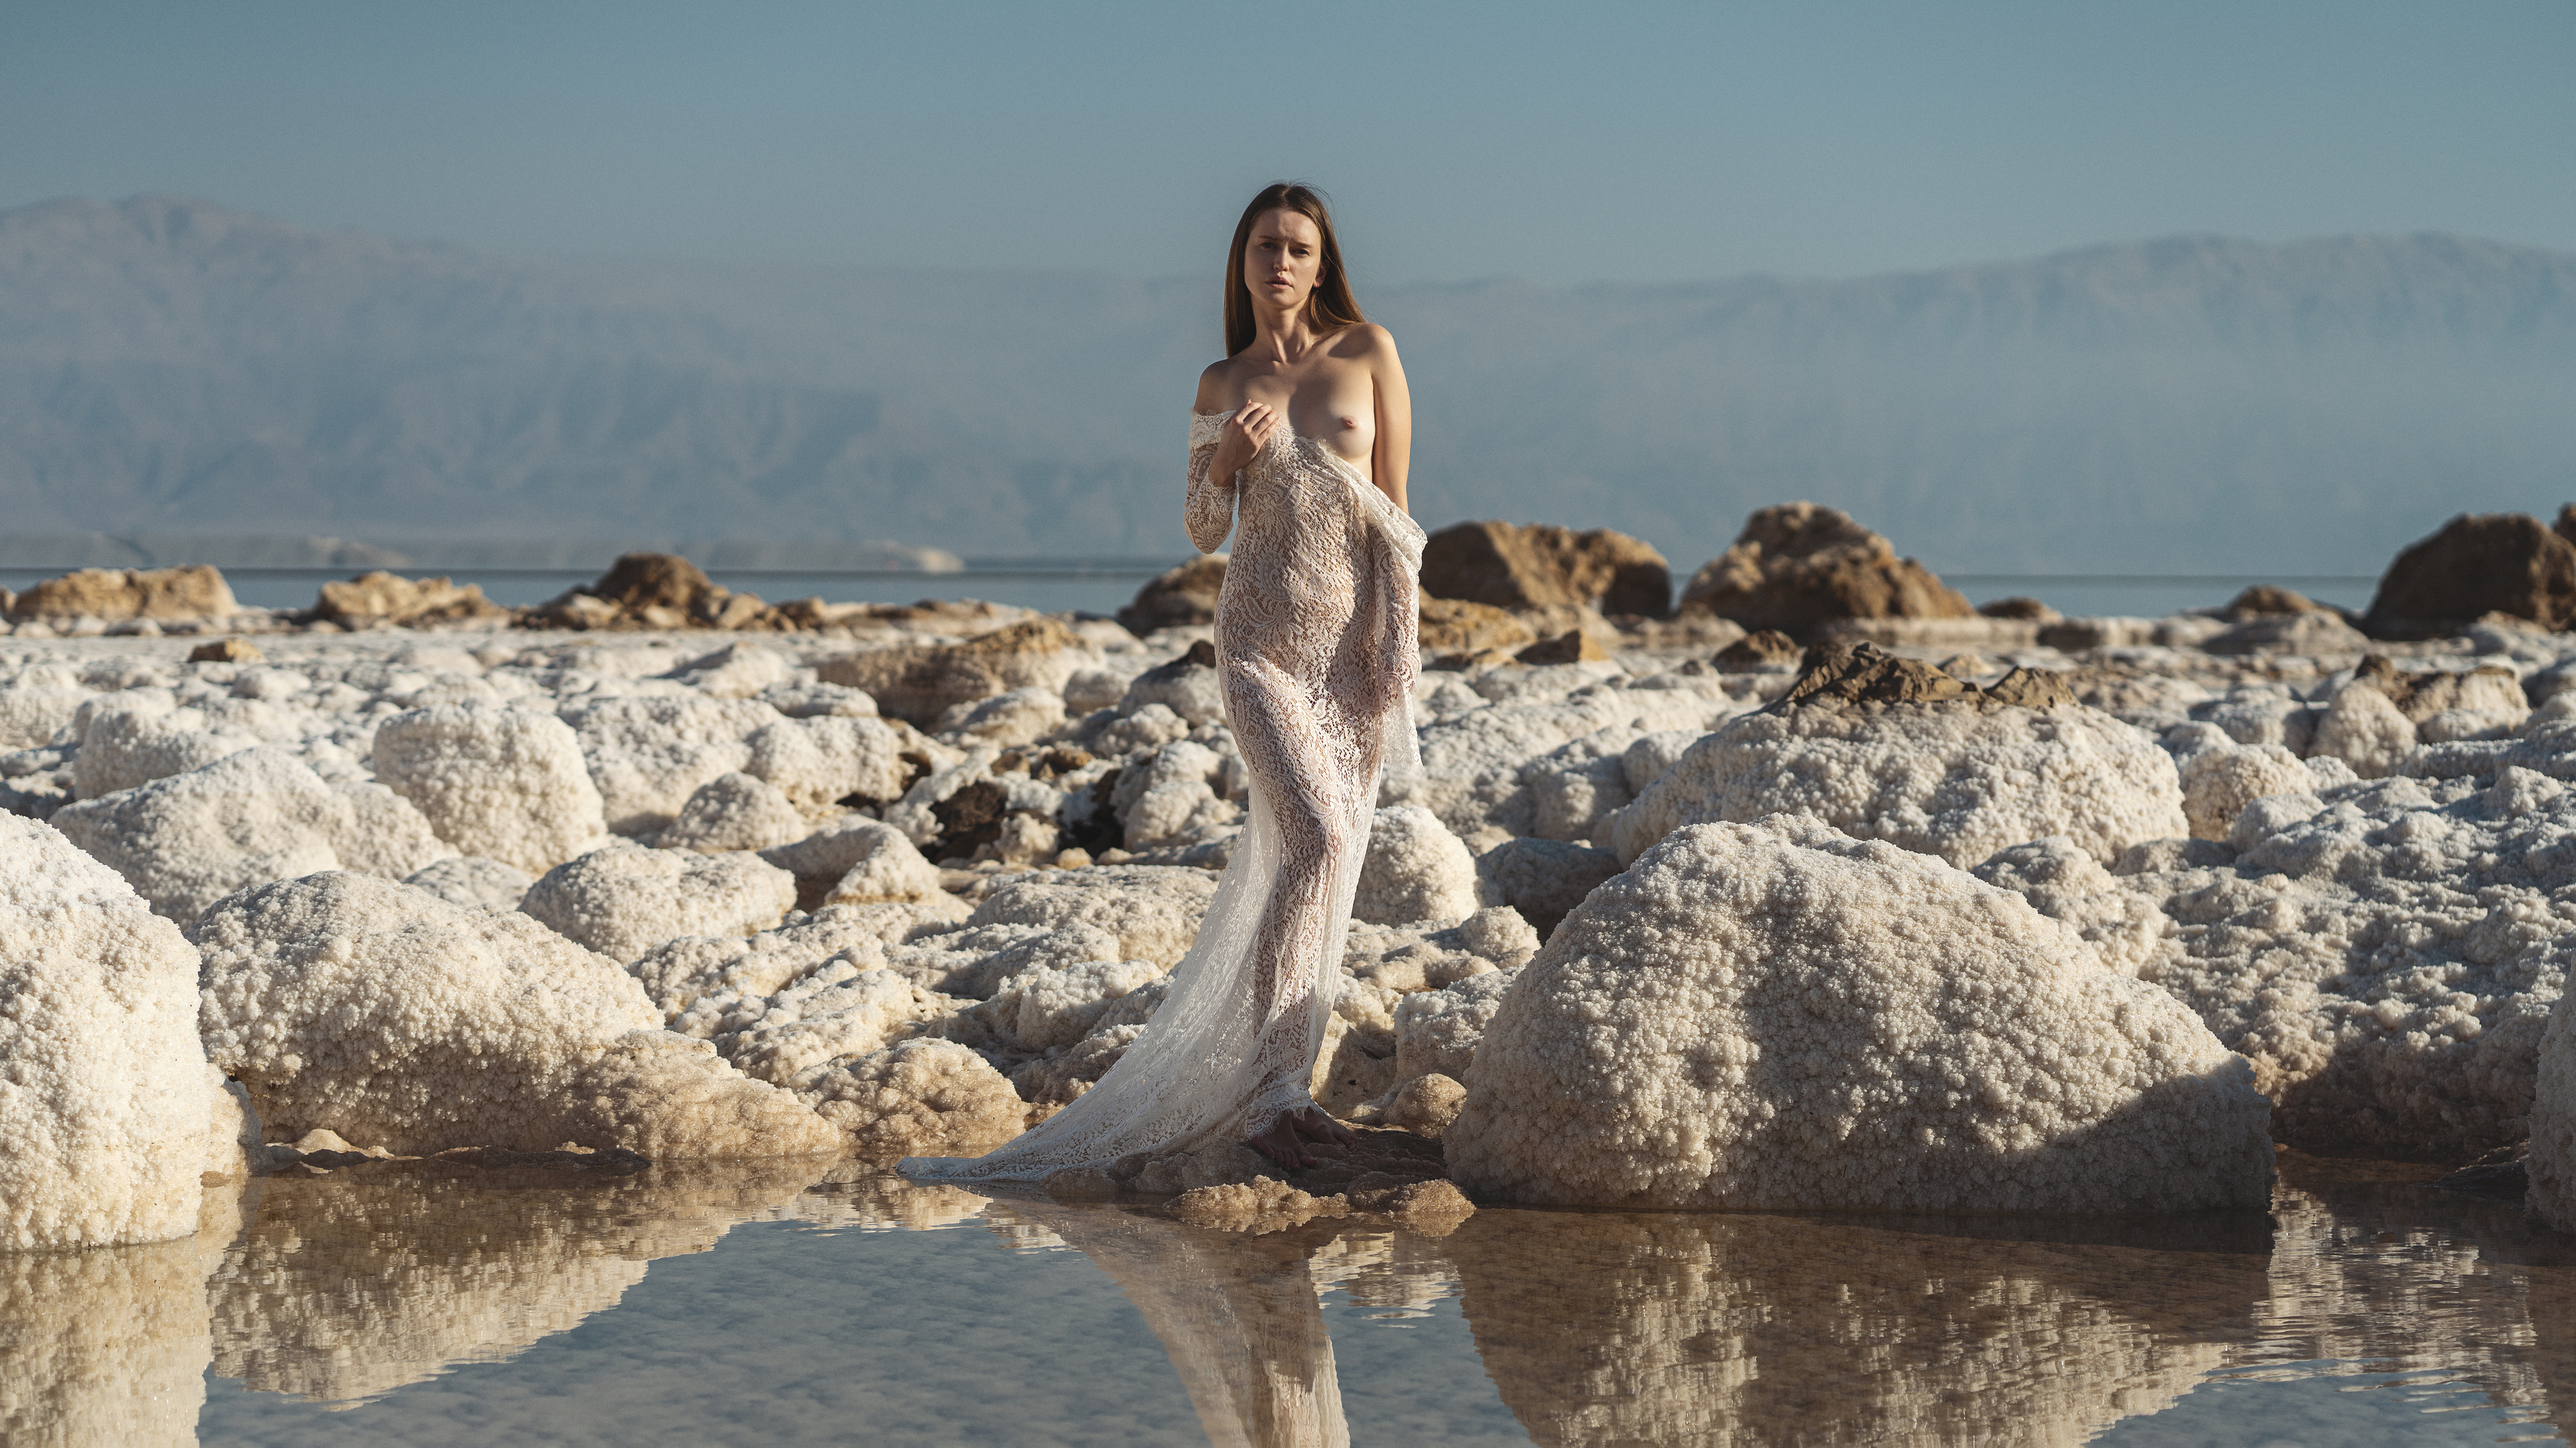 beach, beautiful woman, dead sea, desert, dry, femininity, front view, grace, individuality, looking at camera, naked, nude, one person, outdoors, peignoir, reflections, rocks, salt, seductive women, sensuality, sky, standing, stones, water, young women, Alex Tsarfin